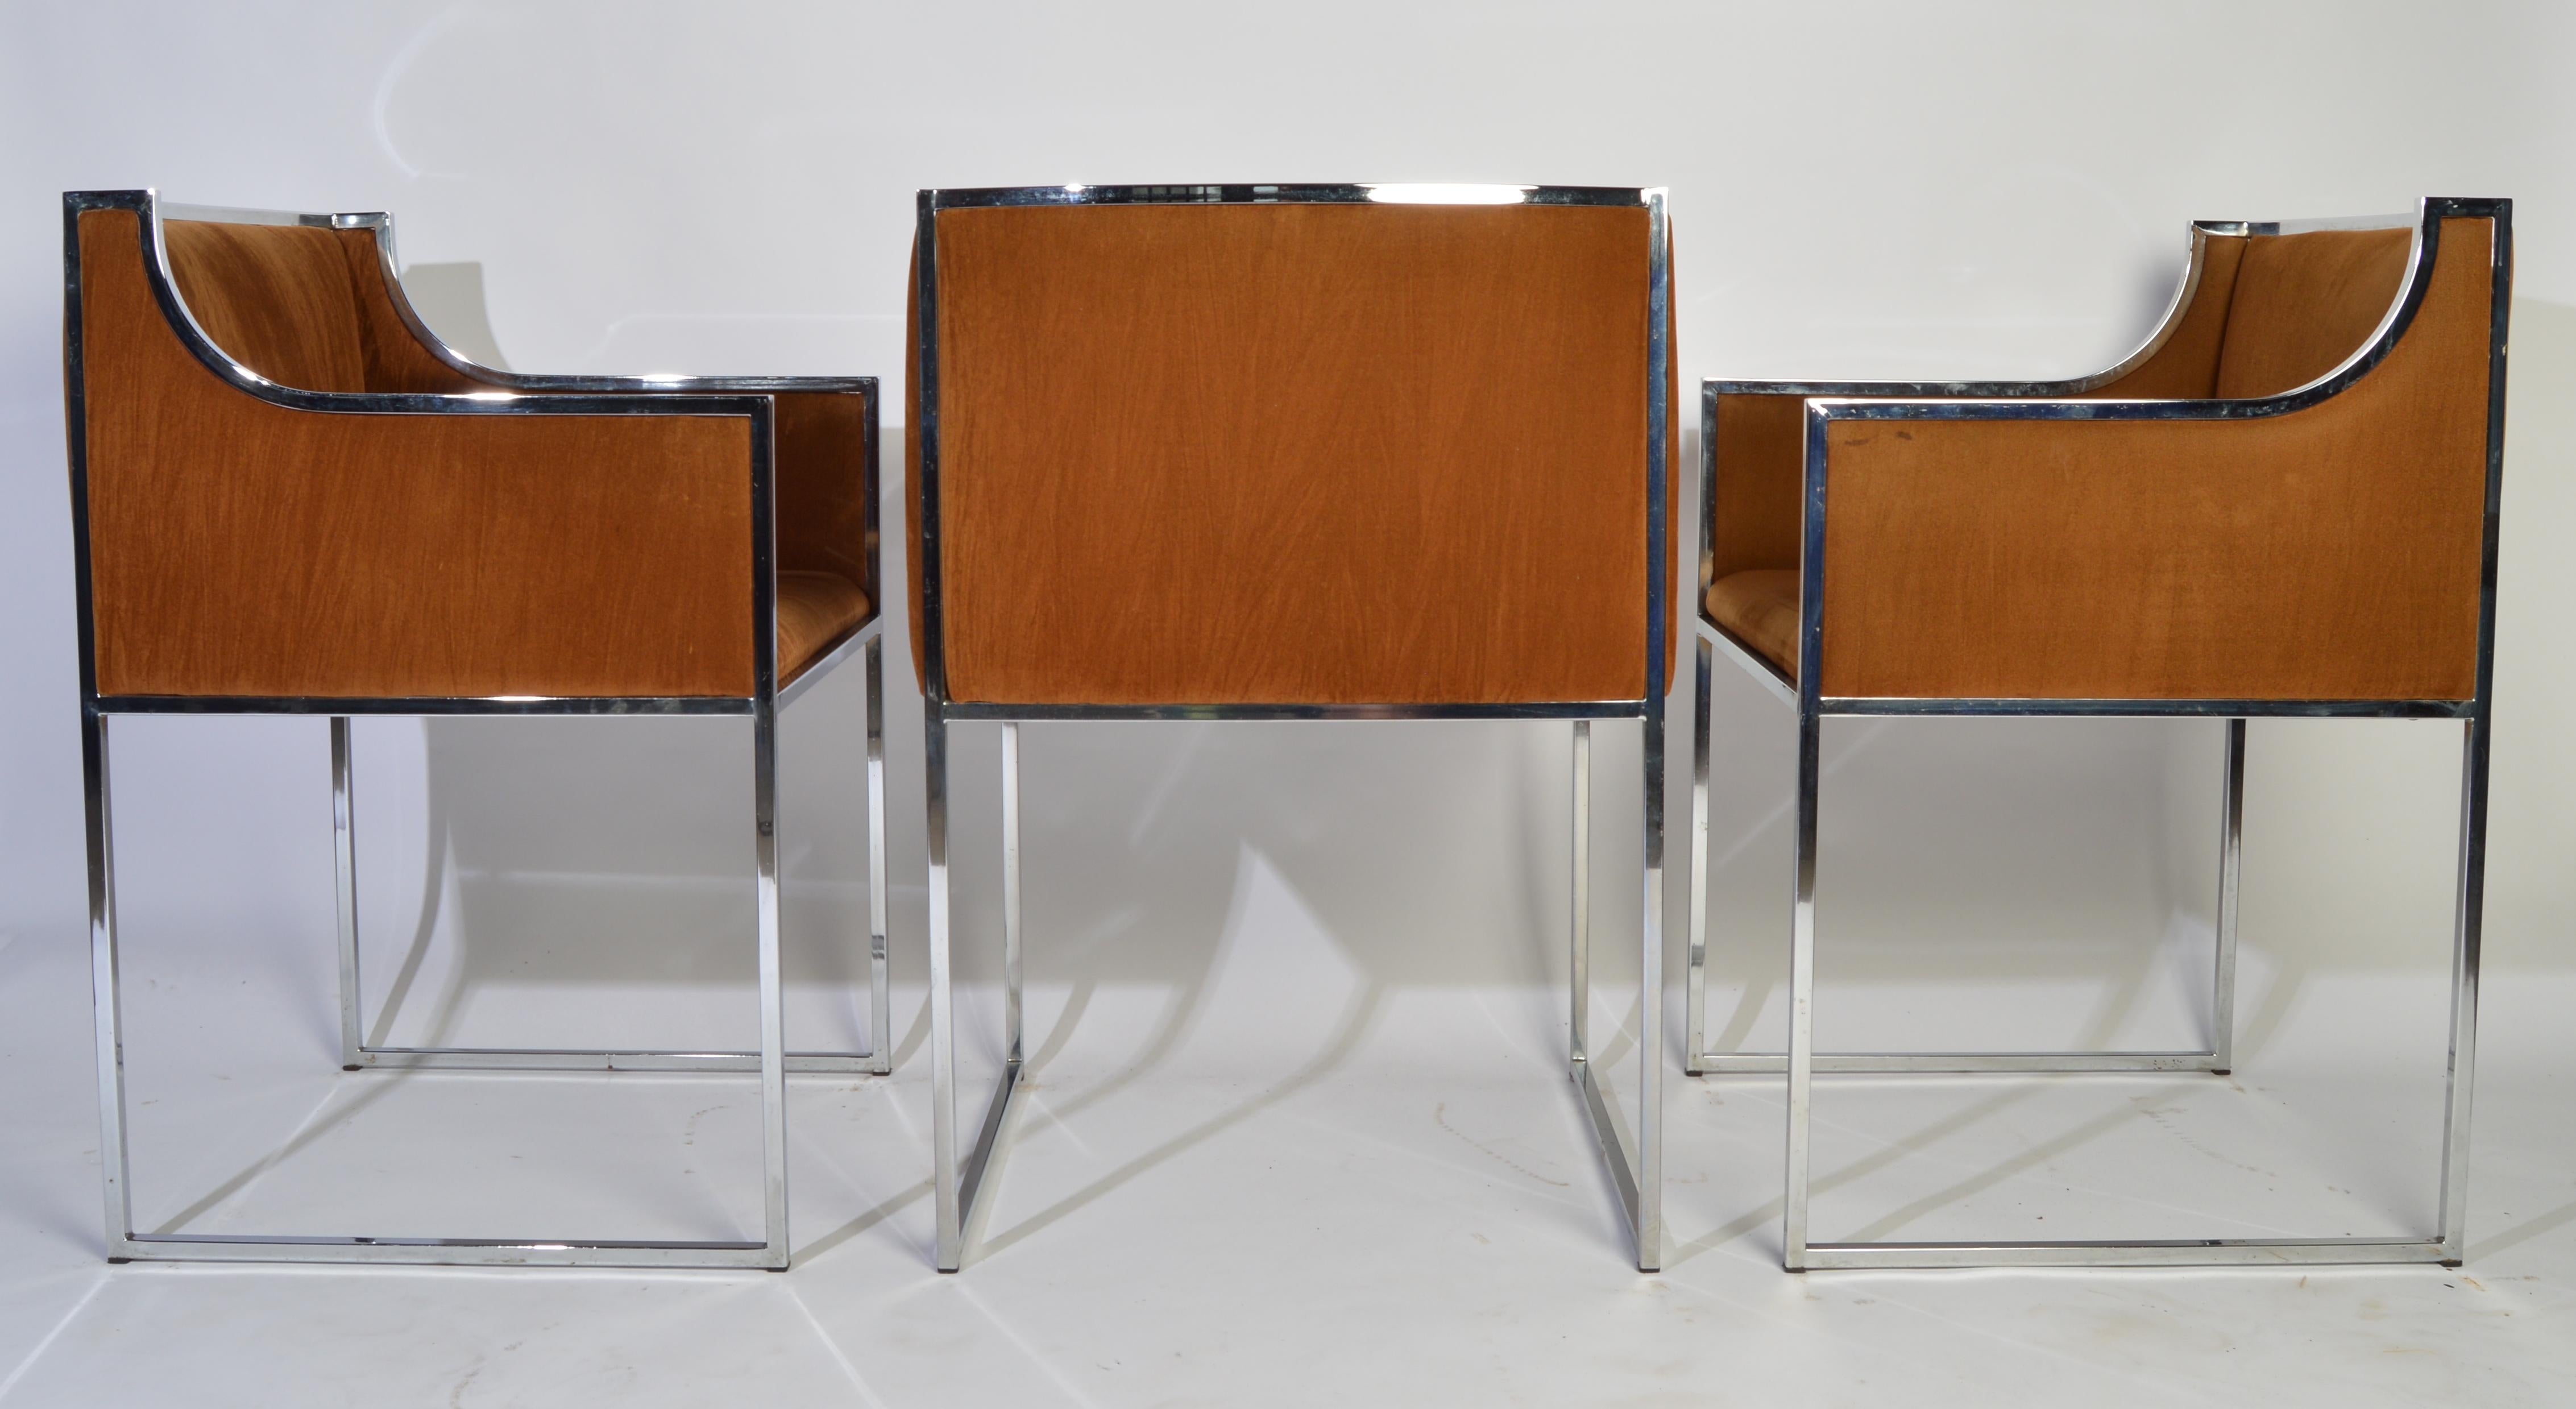 A set of 6 dining armchairs having chrome frames with velvet upholstery by Willy Rizzo, Italy, circa 1970. 
Beautiful original condition. Professionally cleaned and ready for use. Please see images for detailed condition.